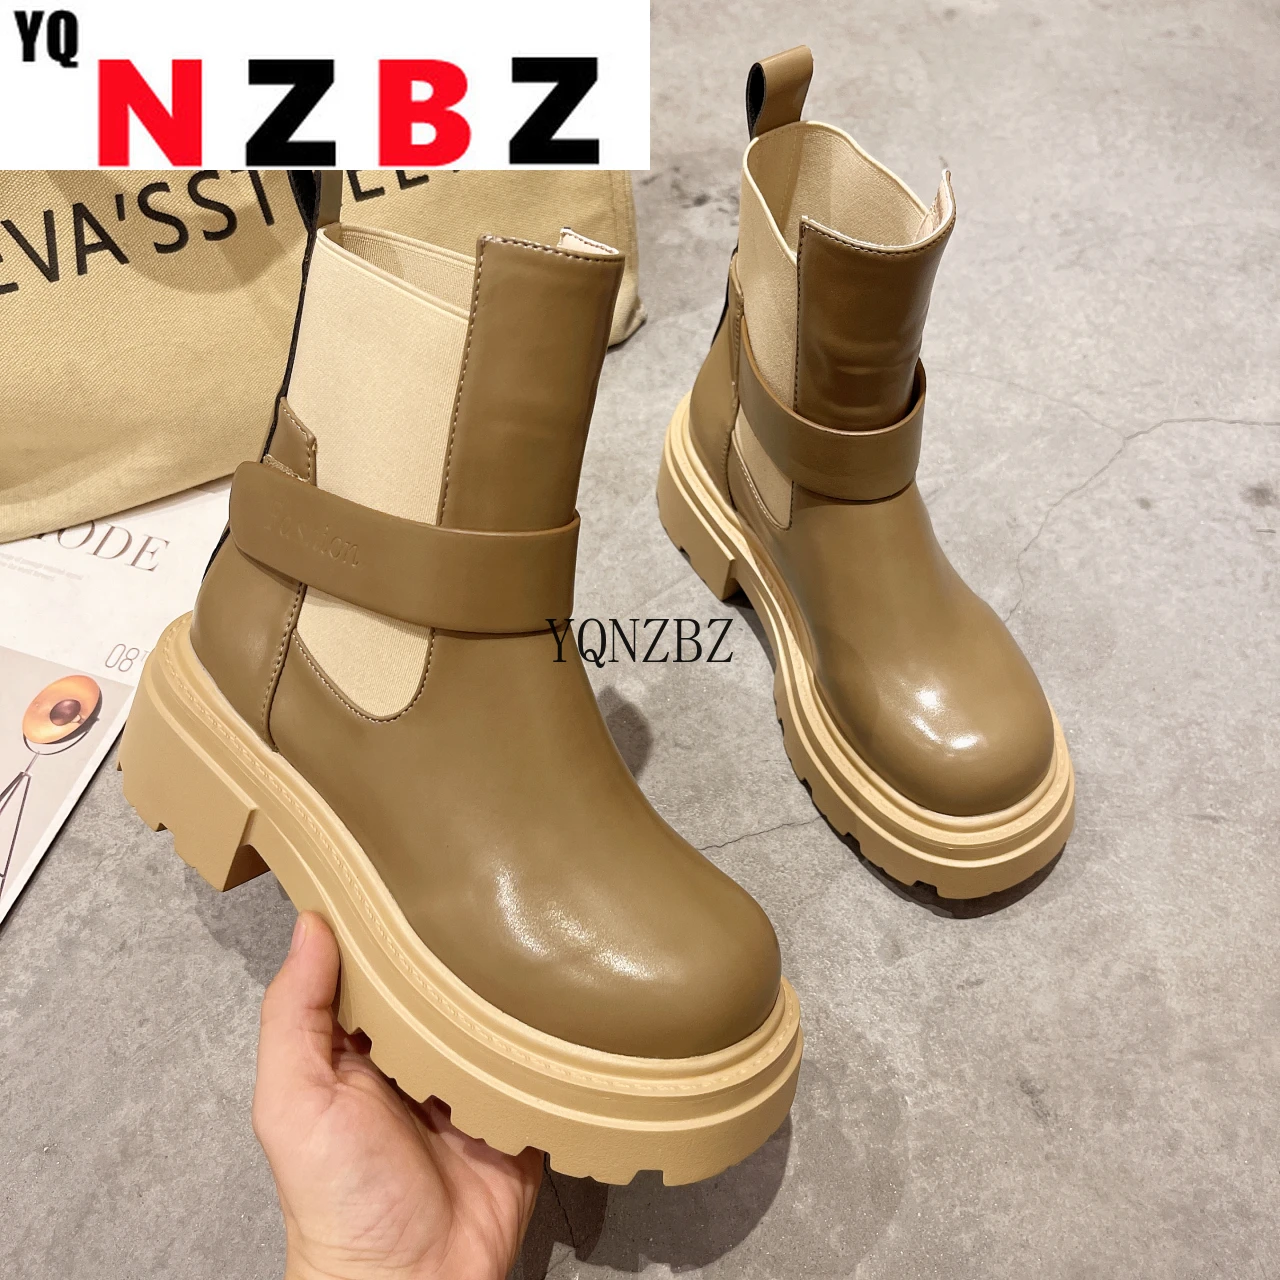 

Brand Design Genuine Leather Ankle Shoes Women Think Heel Short Boots Round Toe High Heel Ladies Boots 2021 Autumn Botas Mujer